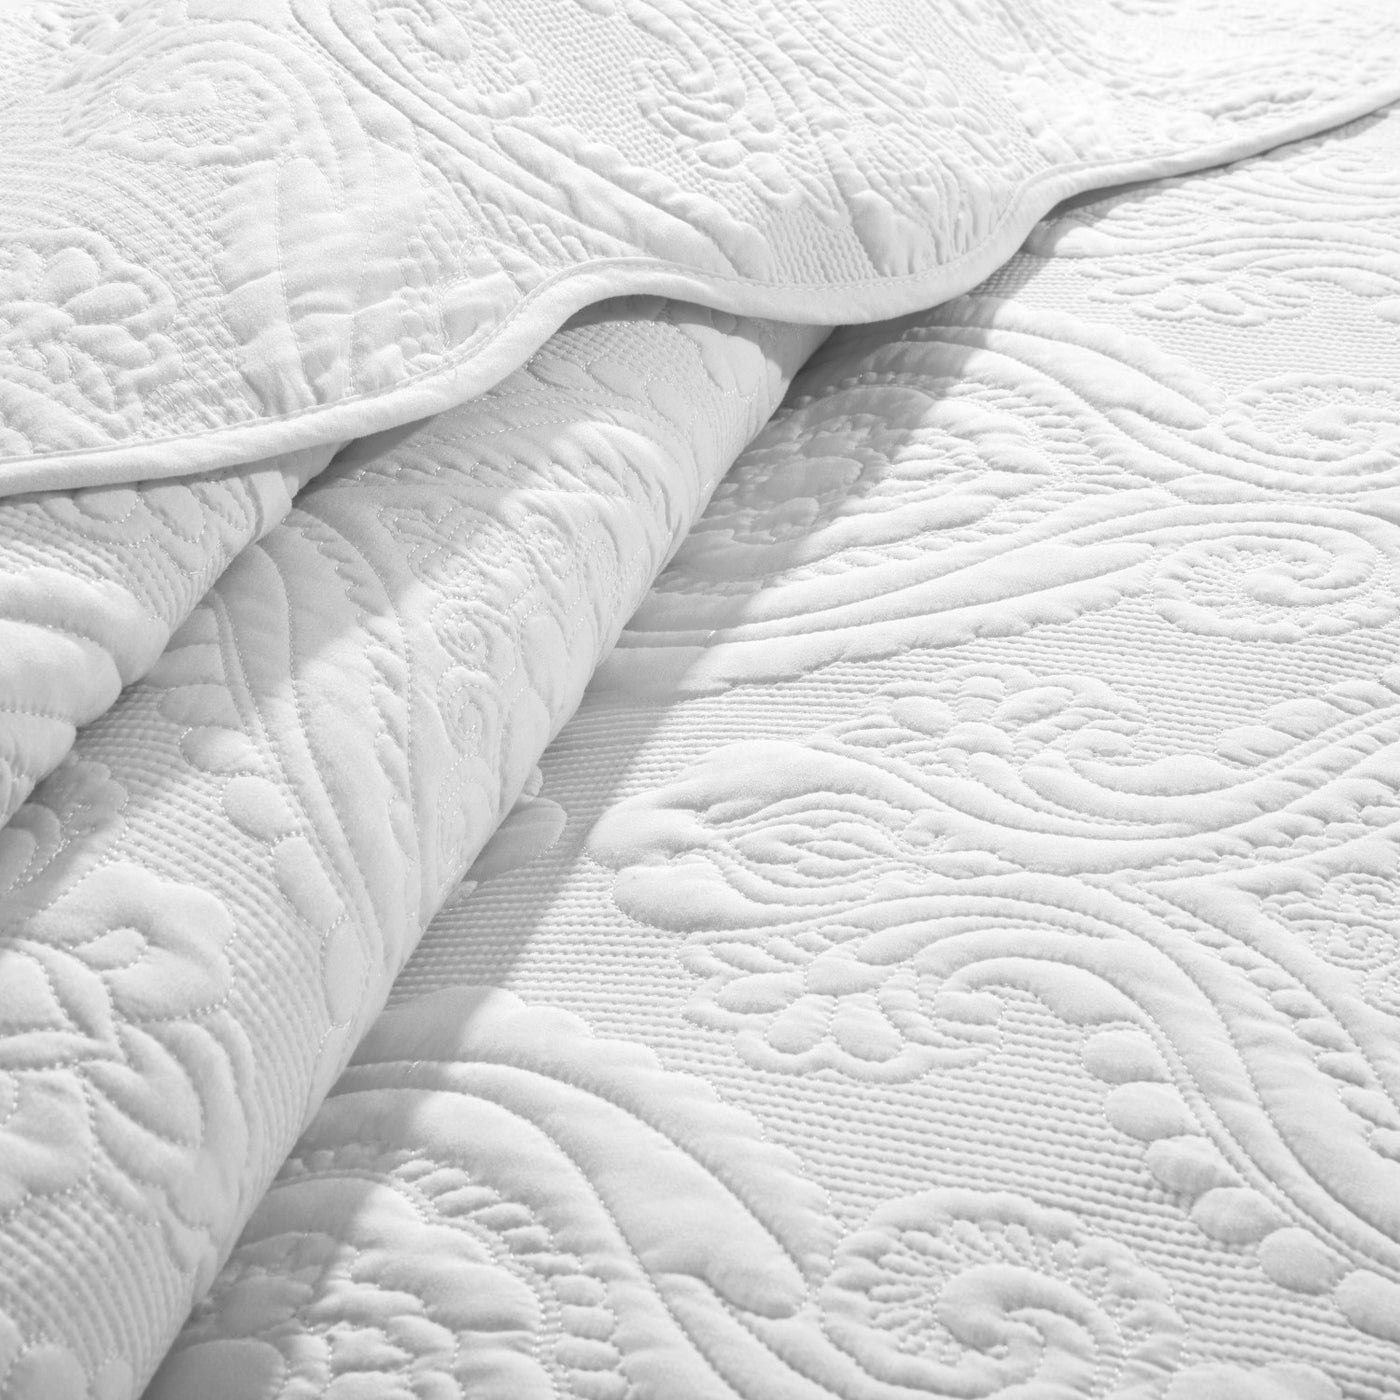 Luxury White Cotton Quilted Bedspread